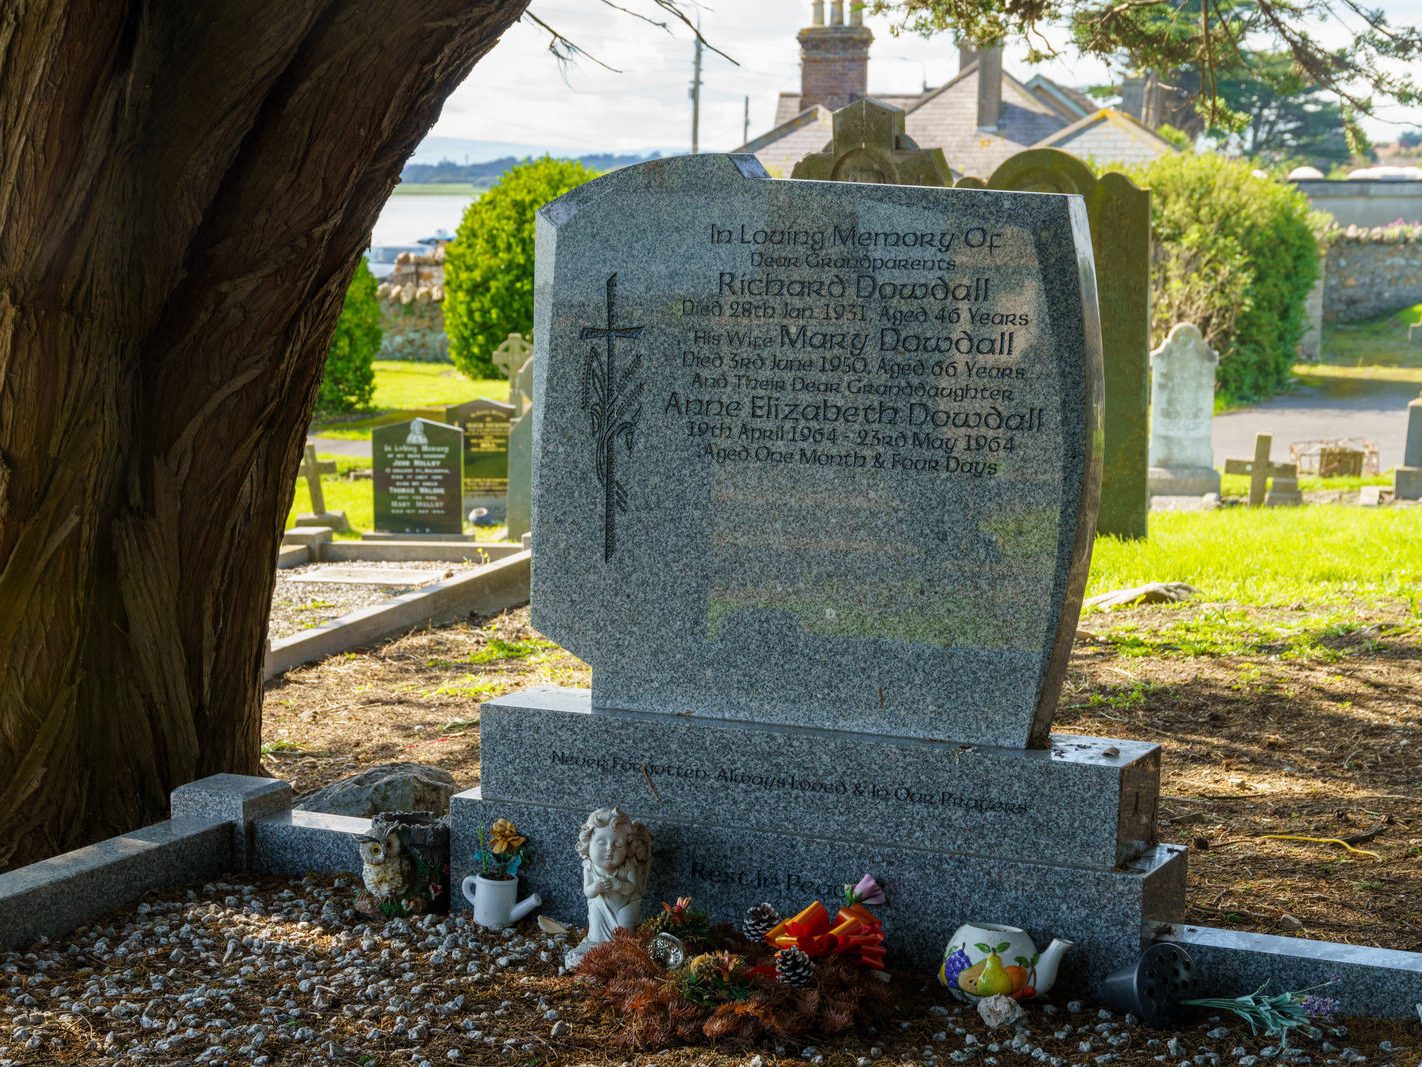 TODAY I MANAGED TO VISIT KILBARRACK CEMETERY [AFTER A NUMBER OF FAILED ATTEMPTS OVER A PERIOD OF TEN YEARS] 019